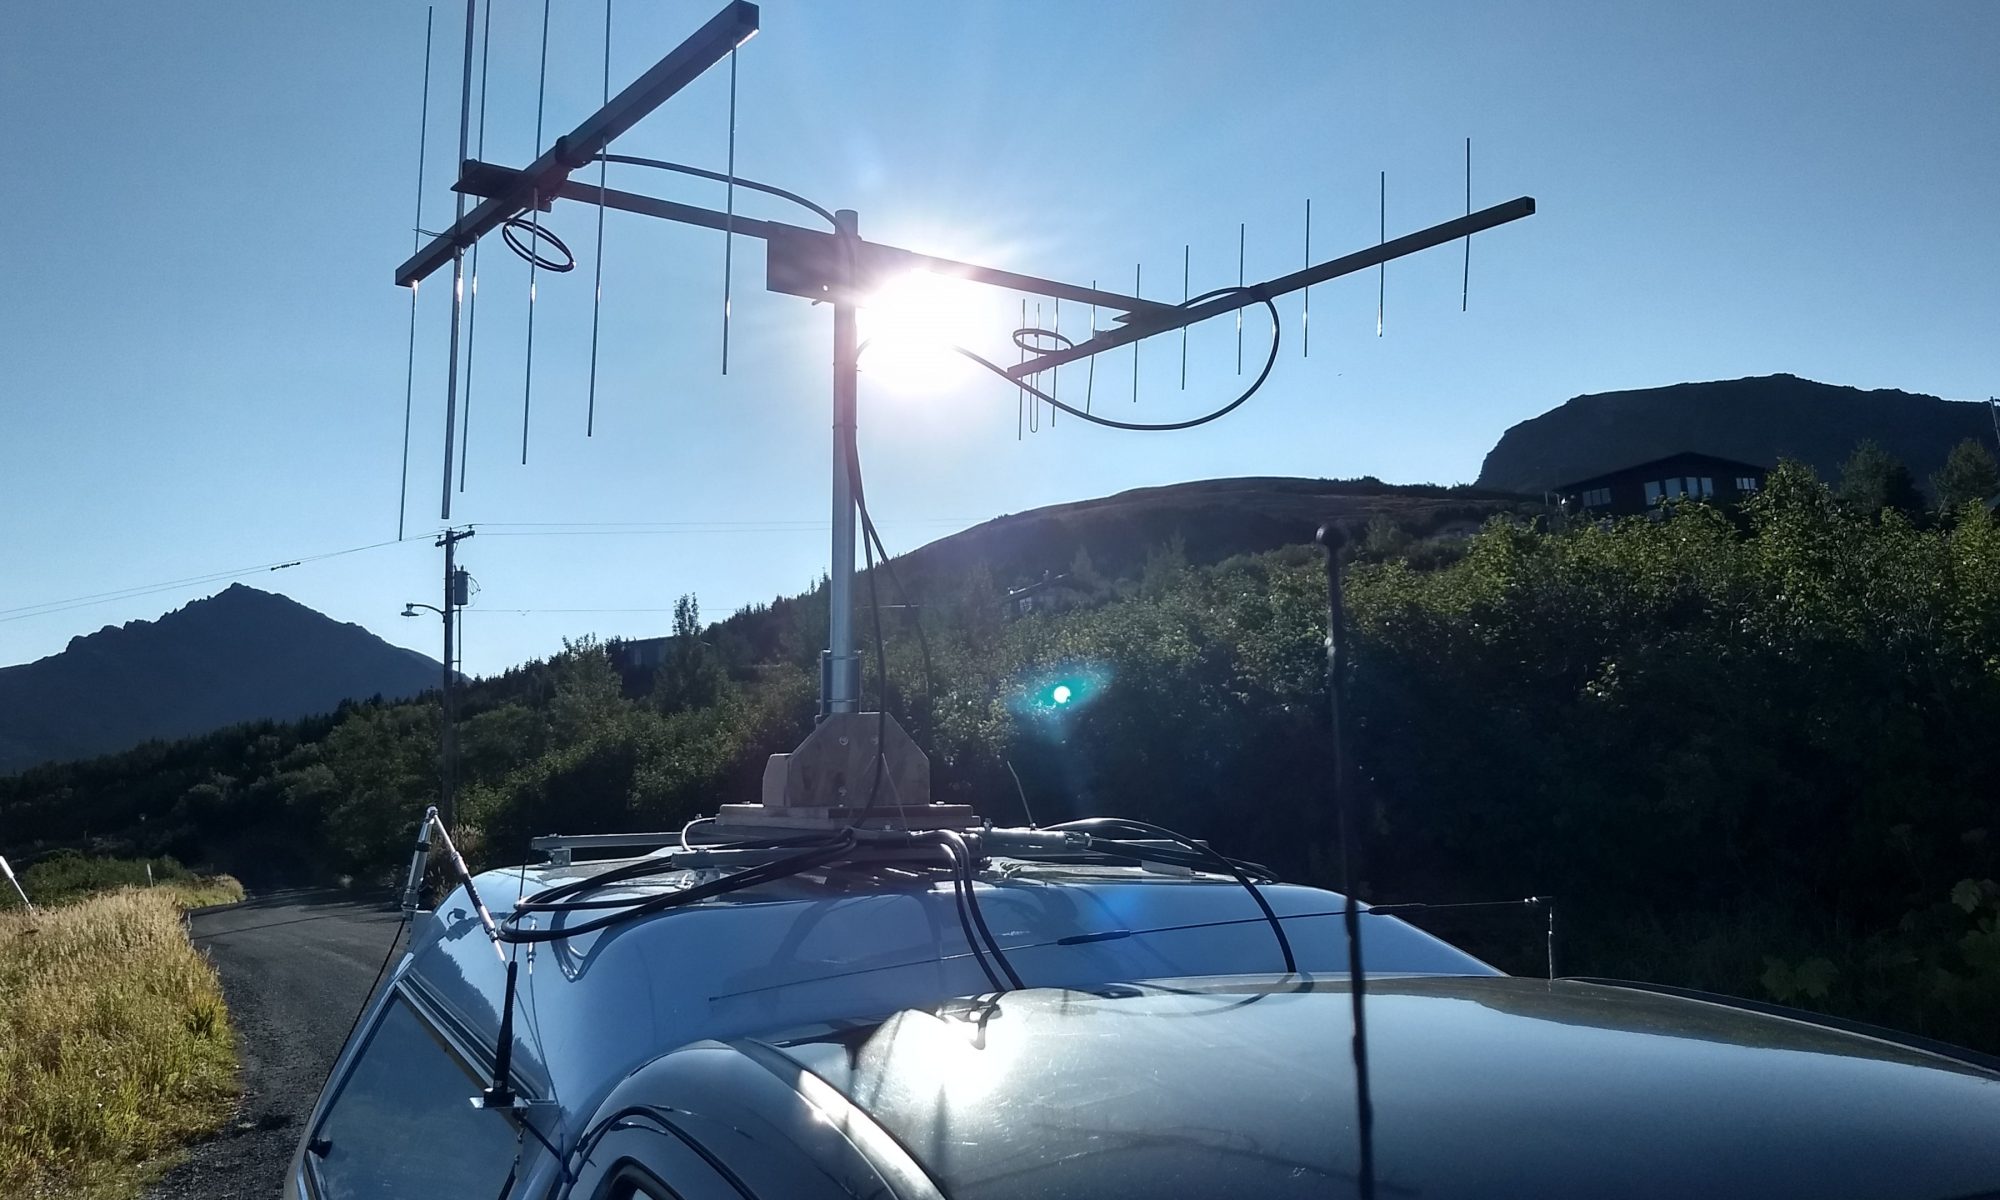 VHF rover antennas on a mobile vehicle